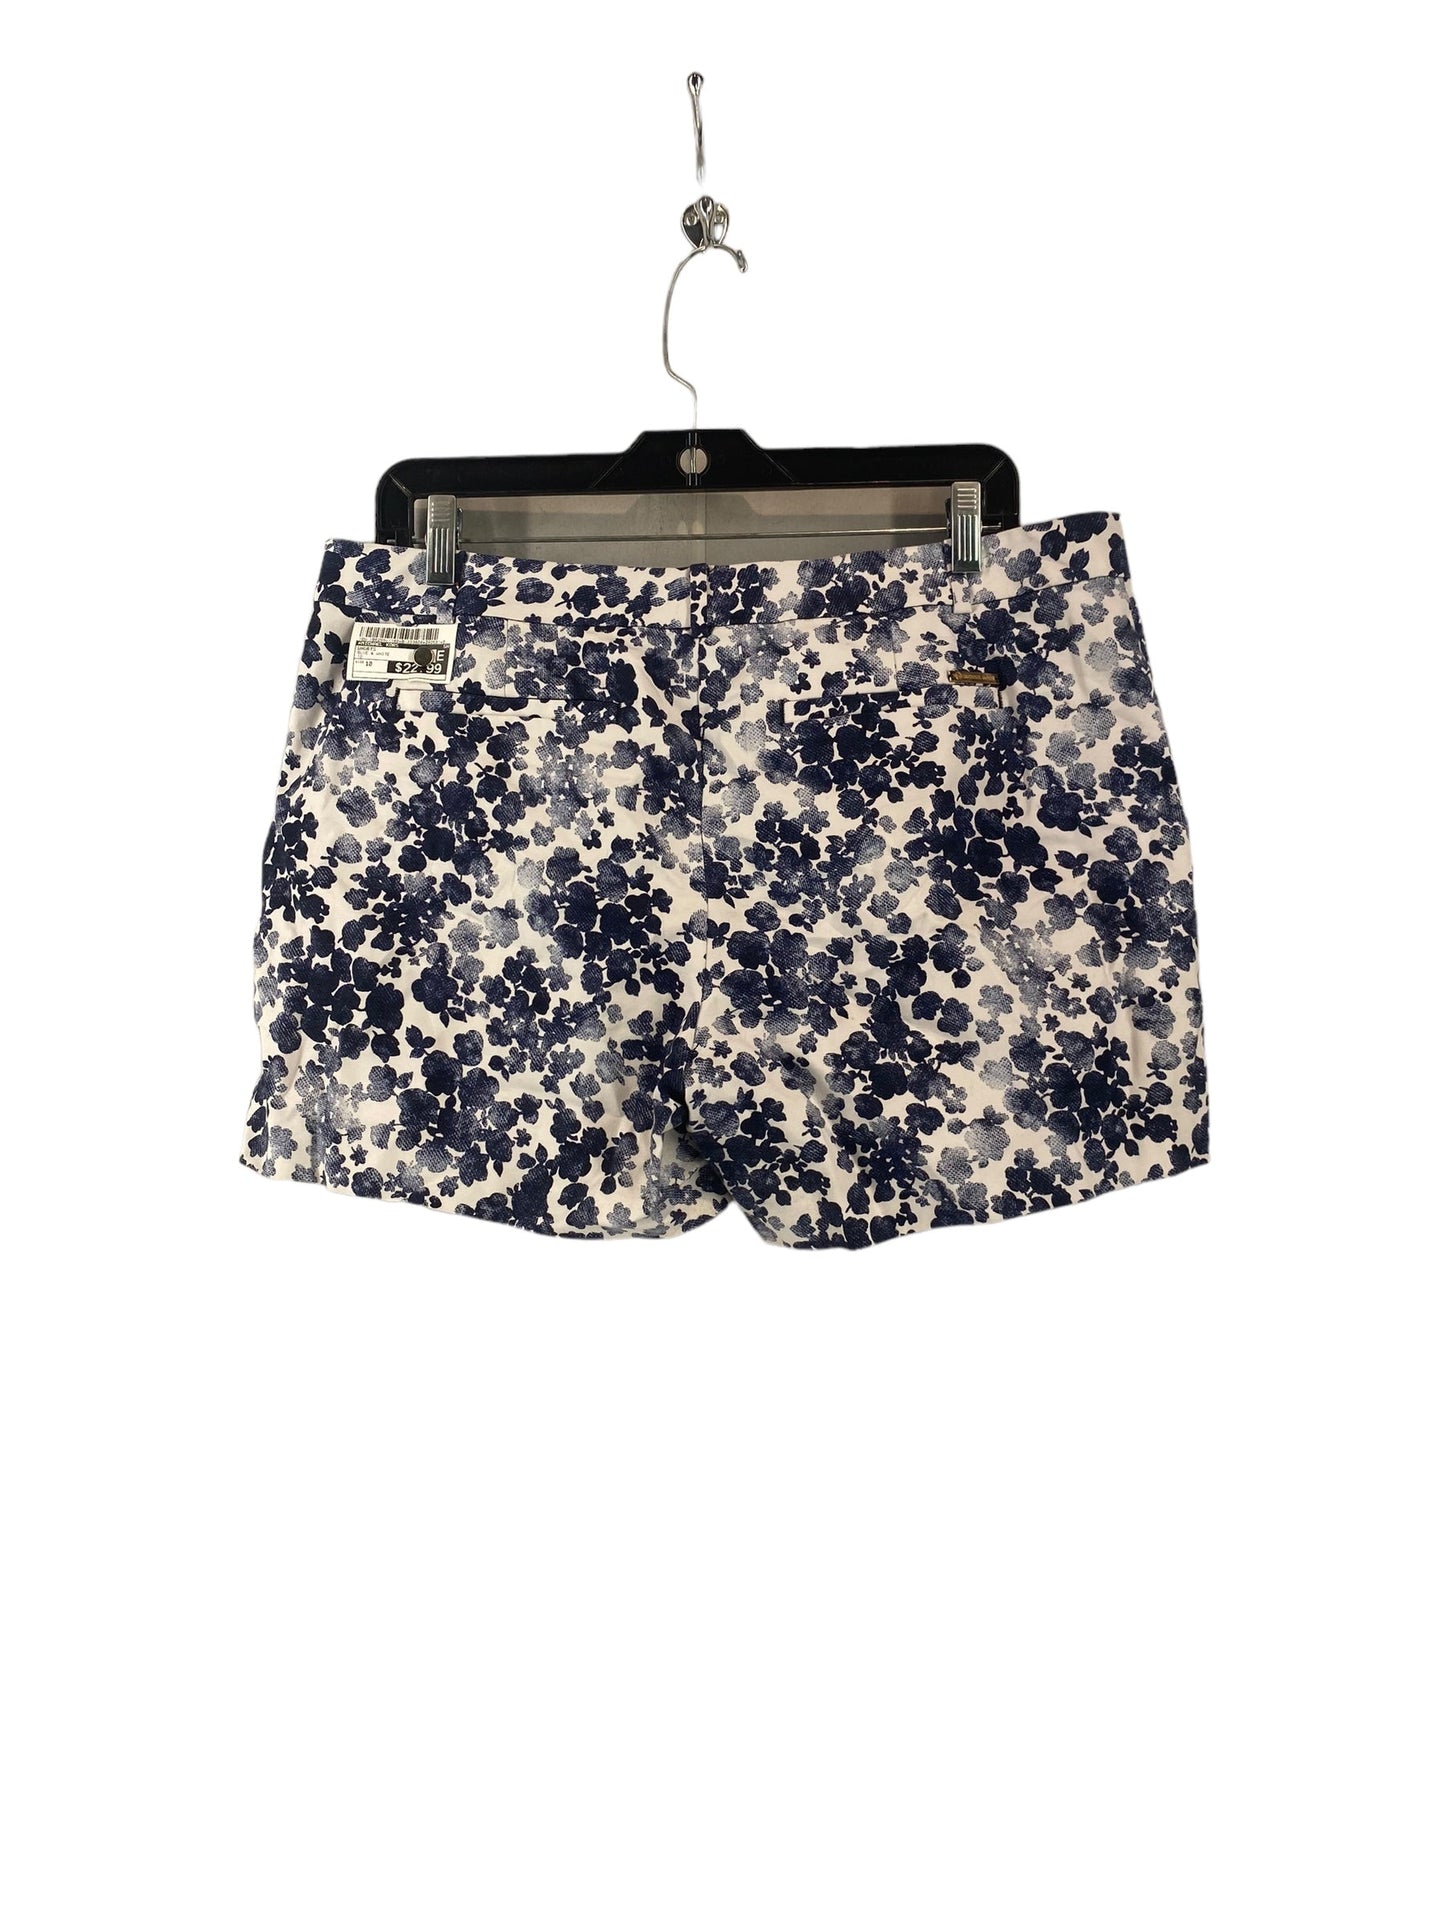 Shorts By Michael Kors  Size: 10